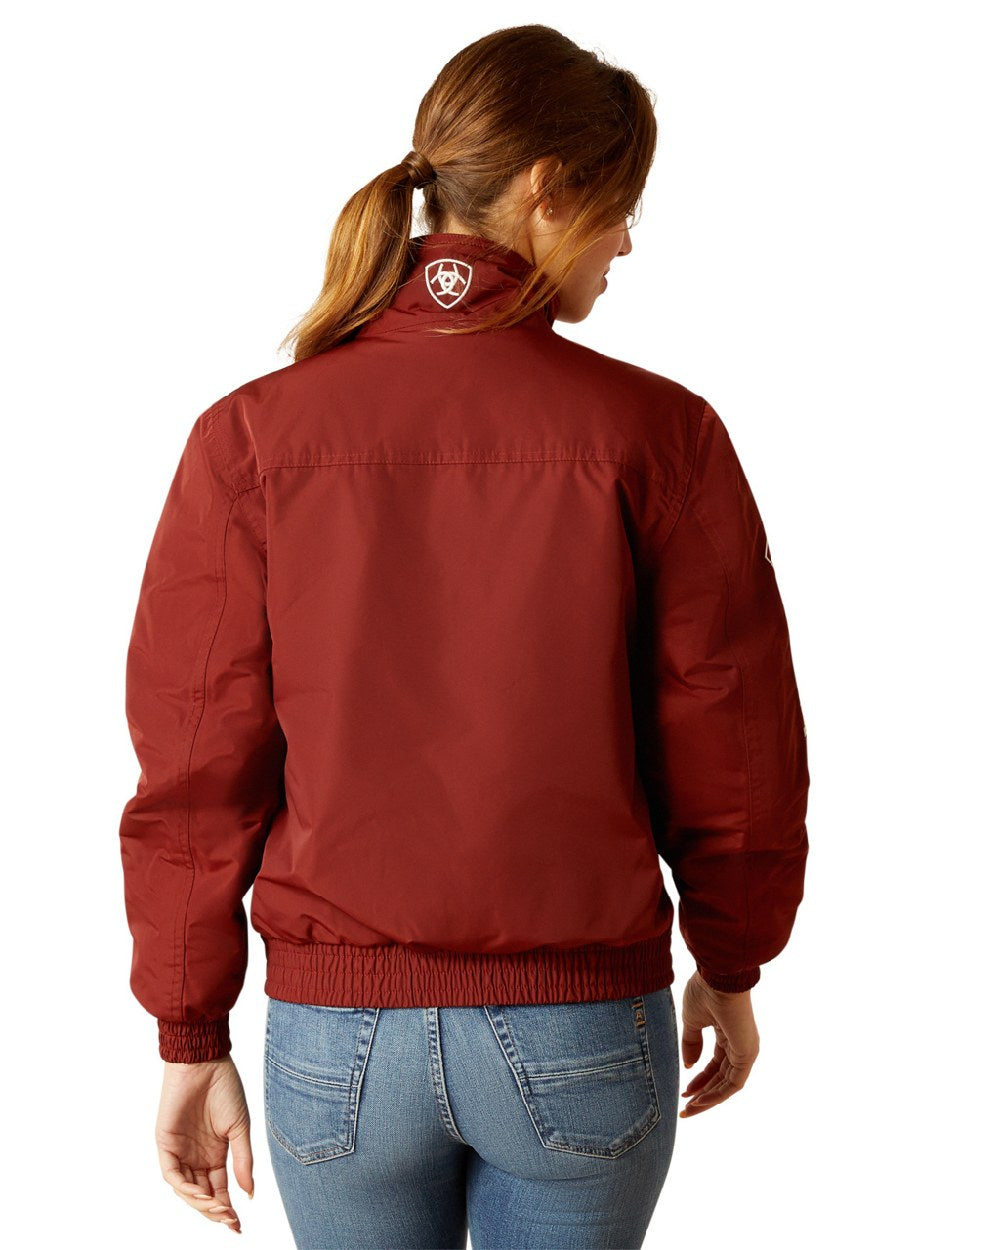 Ariat Womens Stable Insulated Jacket in Fired Brick 